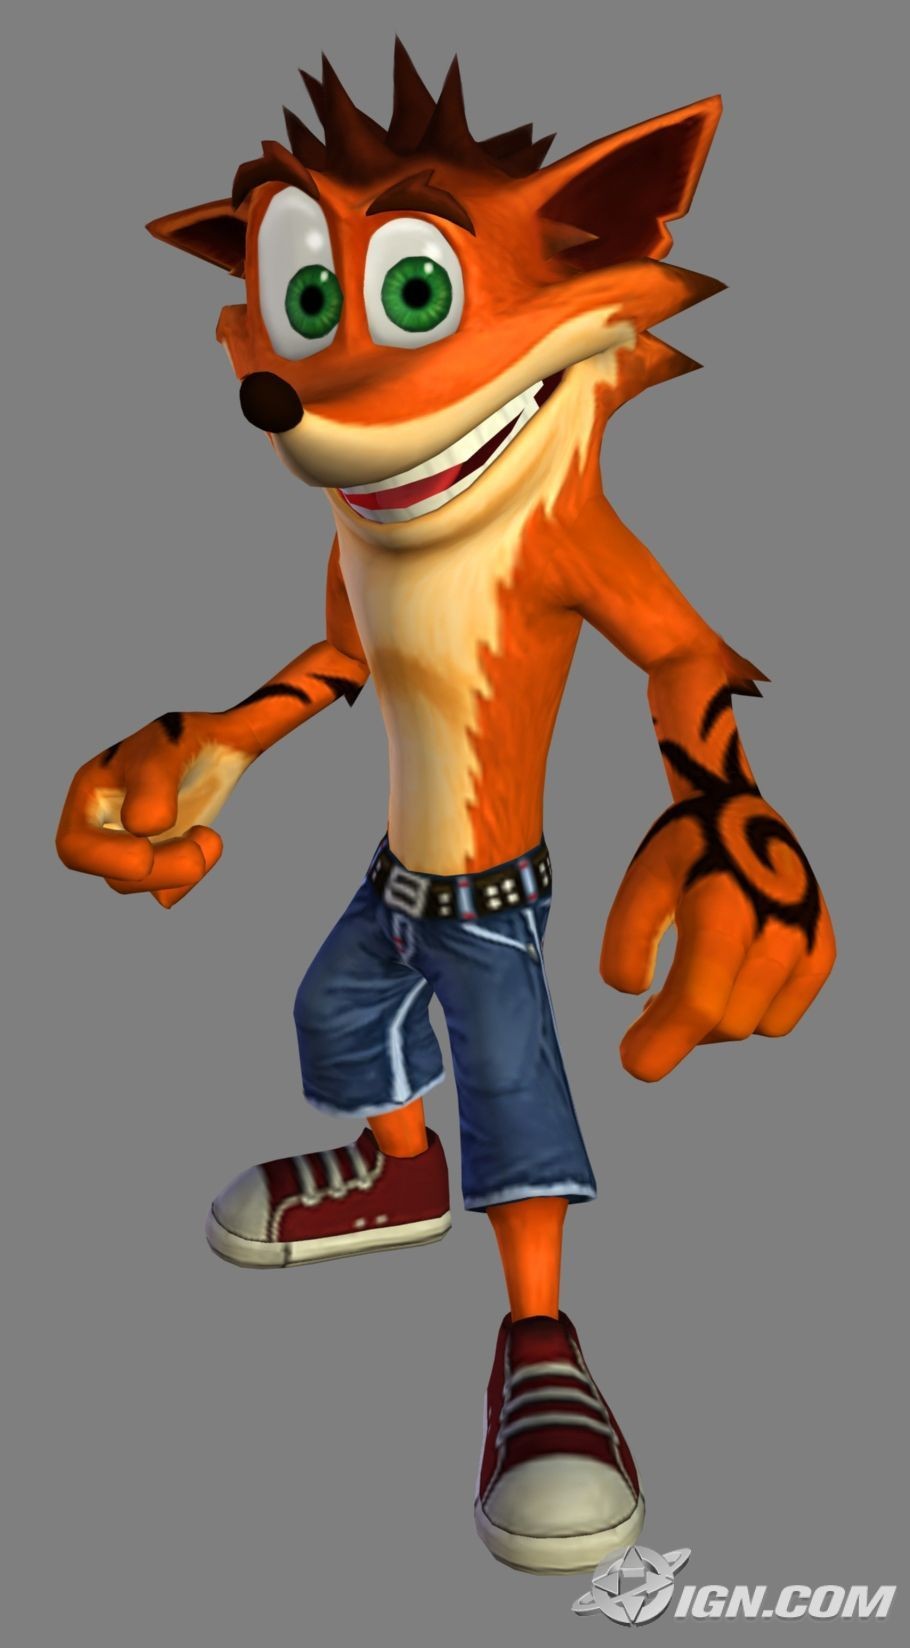 Banjo Kazooie Papercraft Official Render Of Crash Bandicoot From Crash Of the Titans I Feel